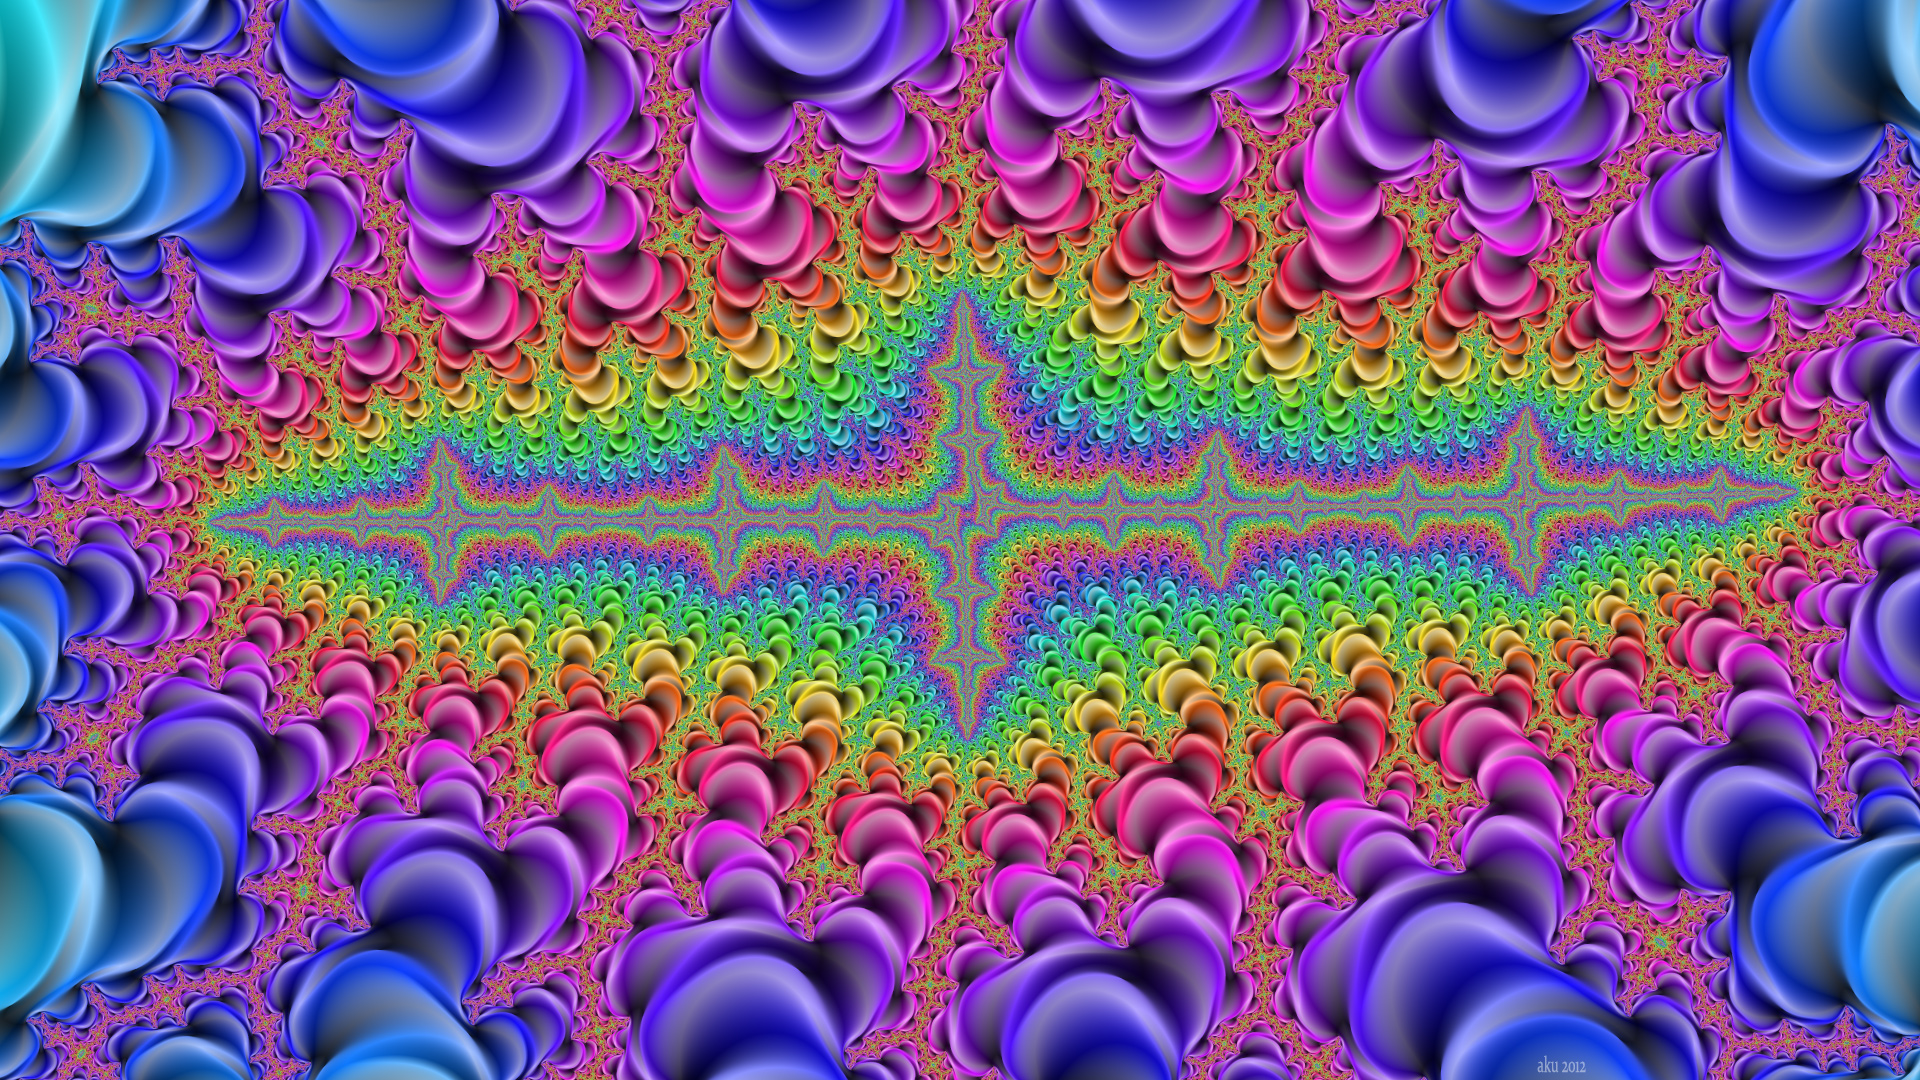 psychedelic, artistic 1080p